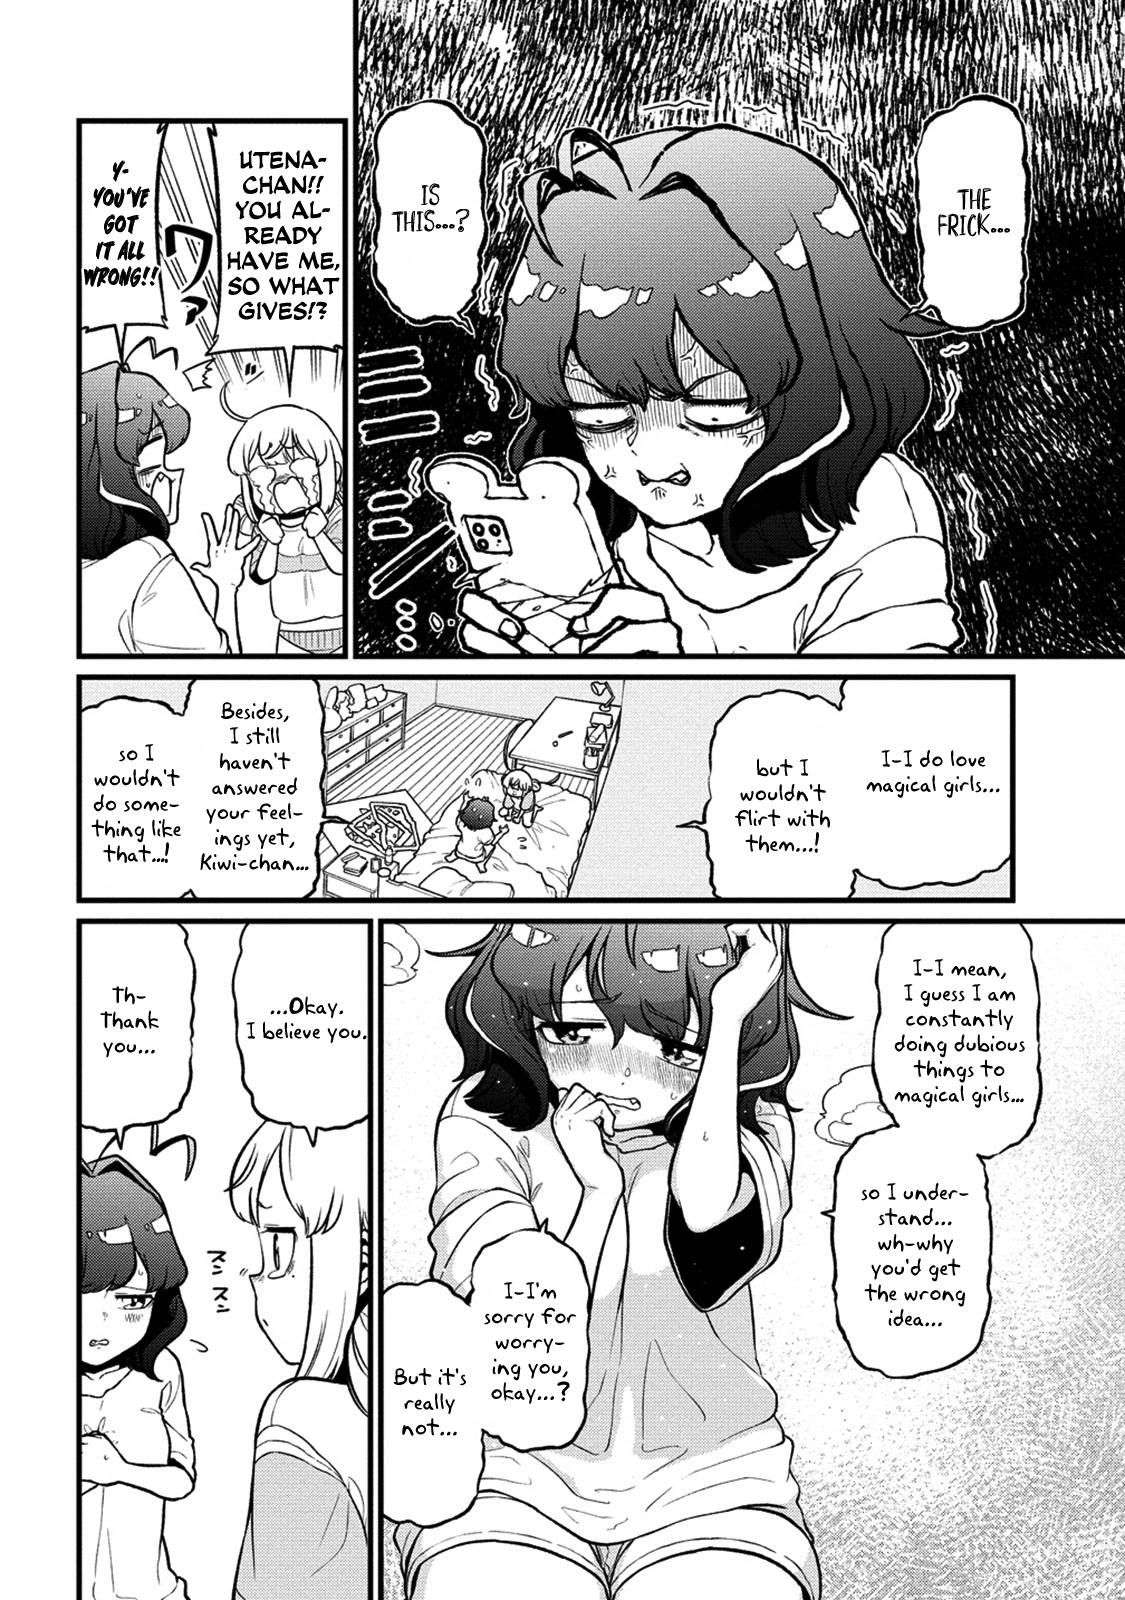 Gushing over Magical Girls - chapter 43 - #6